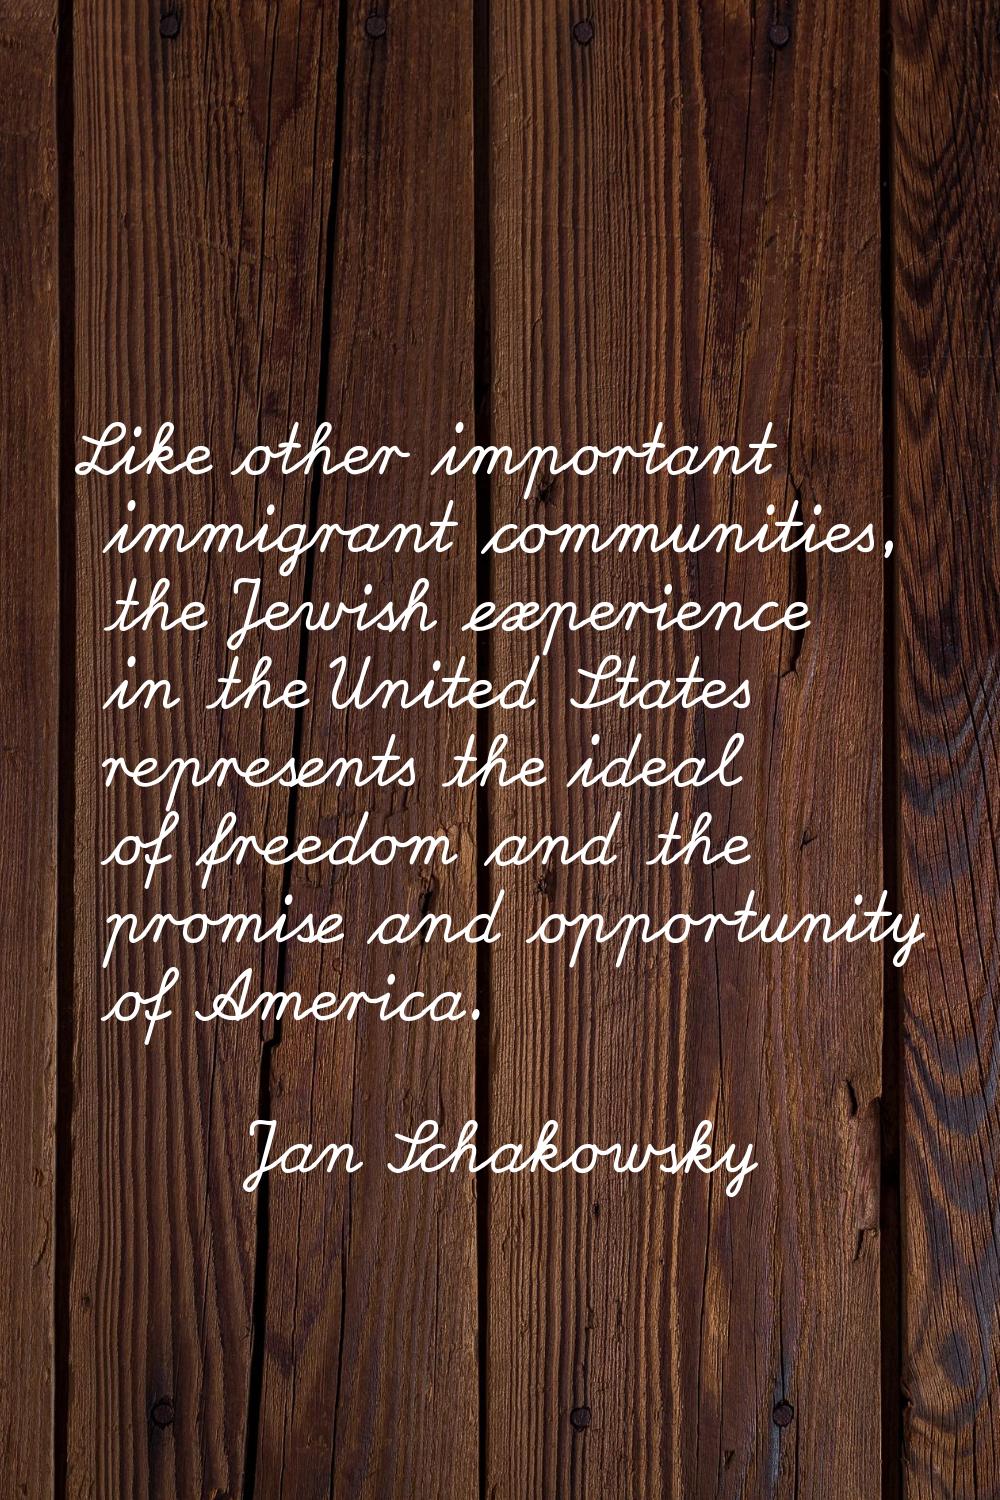 Like other important immigrant communities, the Jewish experience in the United States represents t